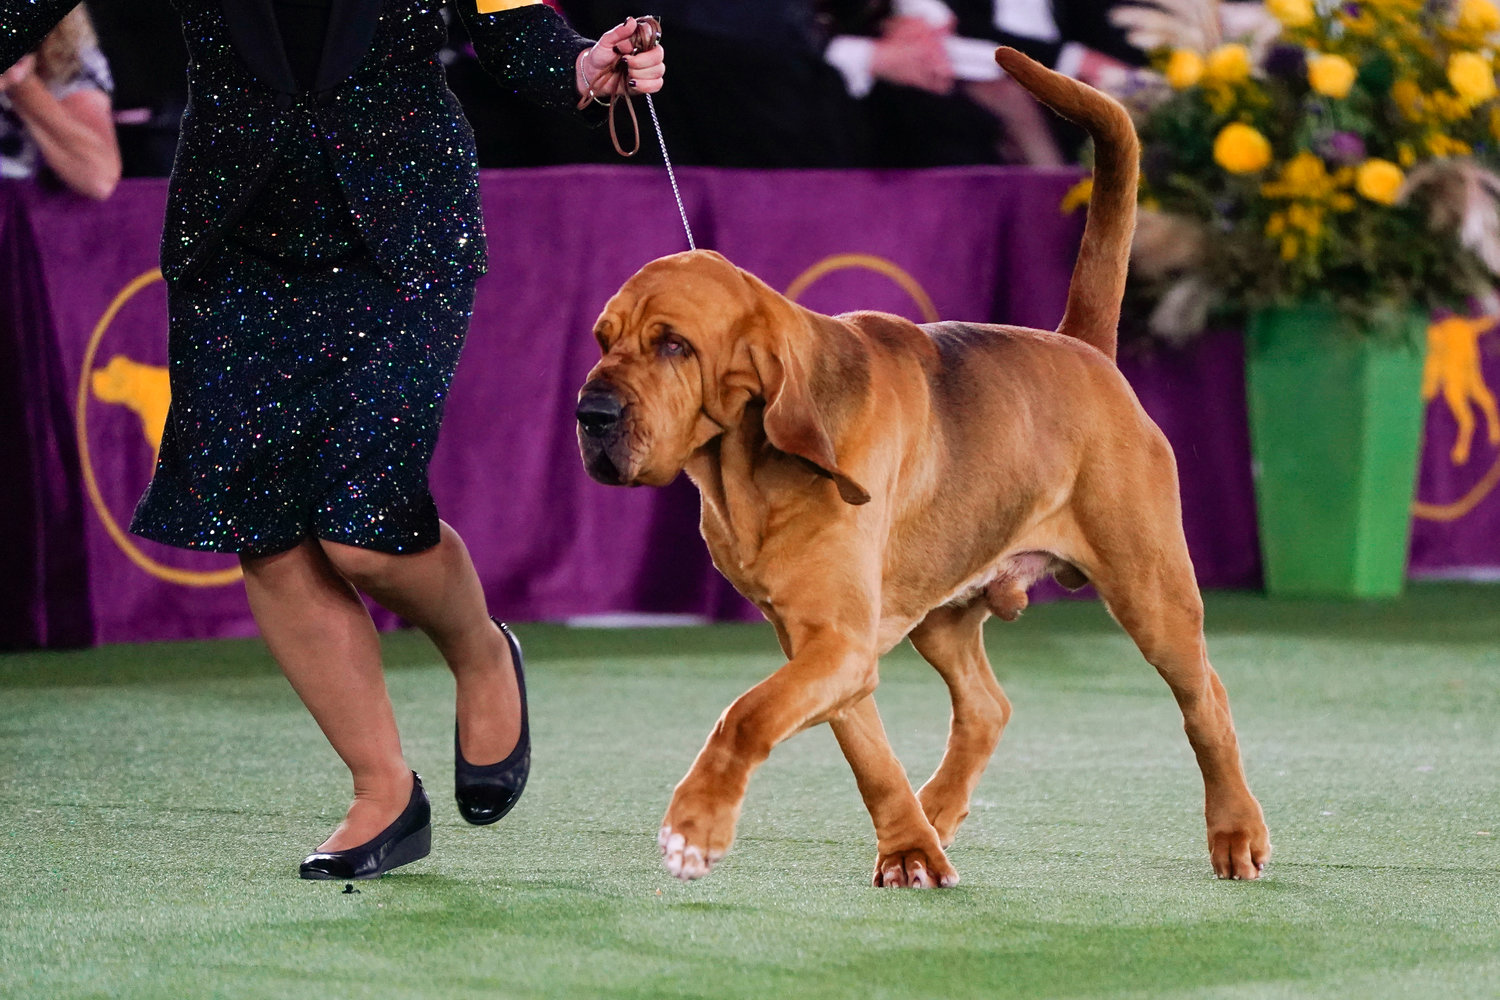 Trumpet, a bloodhound, competes for Best in Show at the 146th Westminster Kennel Club Dog Show, Wednesday, June 22, 2022, in Tarrytown, N.Y. Trumpet won the title. (AP Photo/Frank Franklin II)